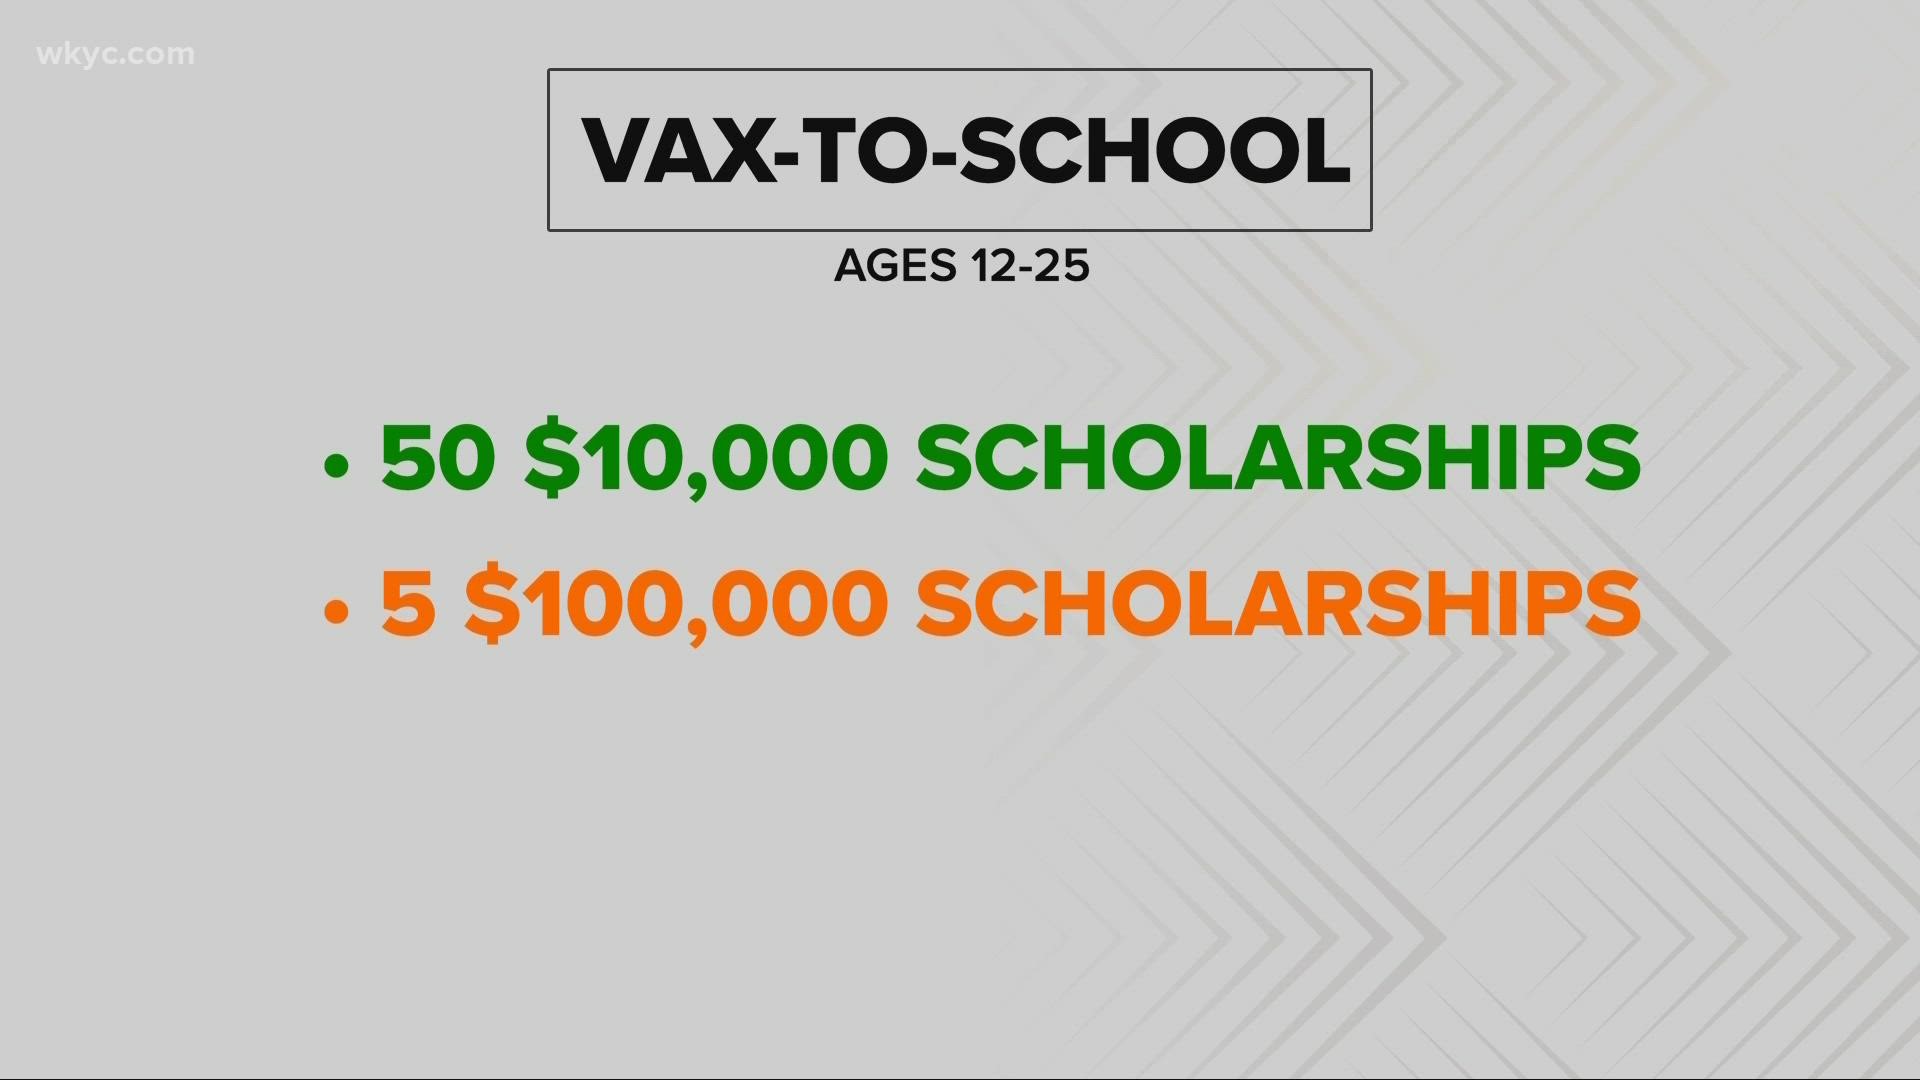 Ohio Governor Mike DeWine has announced the details of the state's "Vax to School" program.